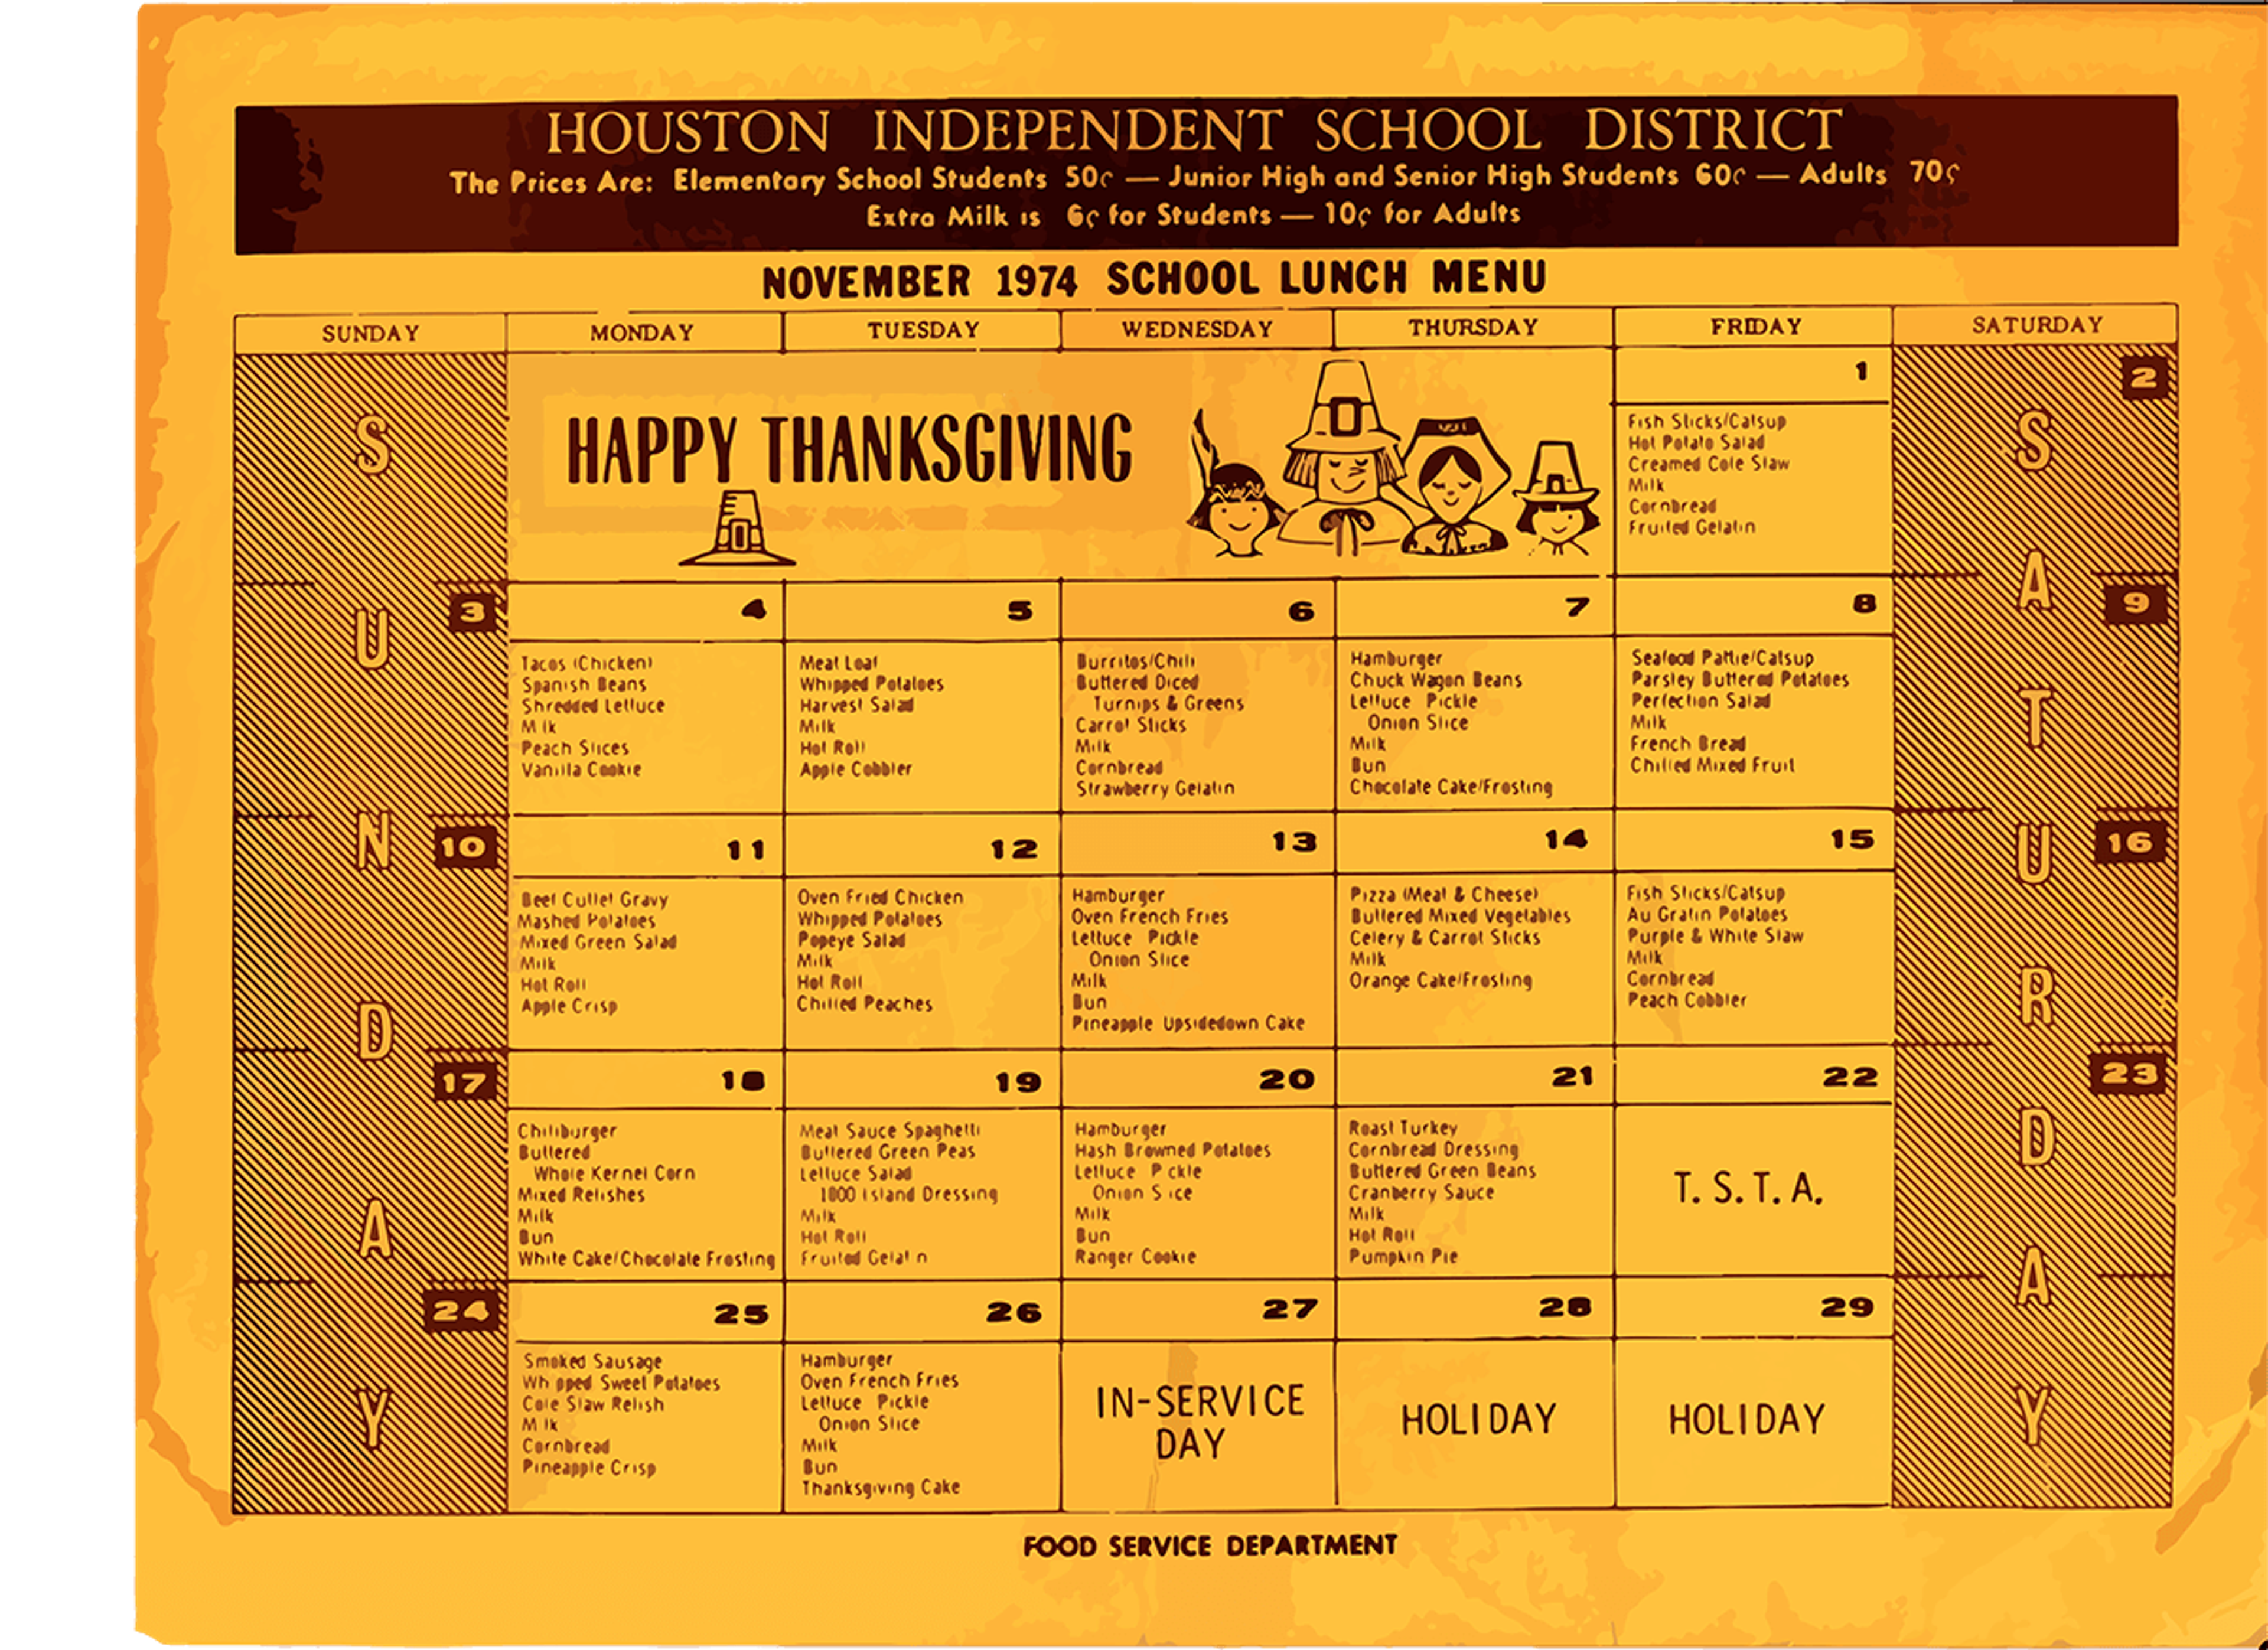 A picture of the Houston Independent School District November 1974 school lunch menu.